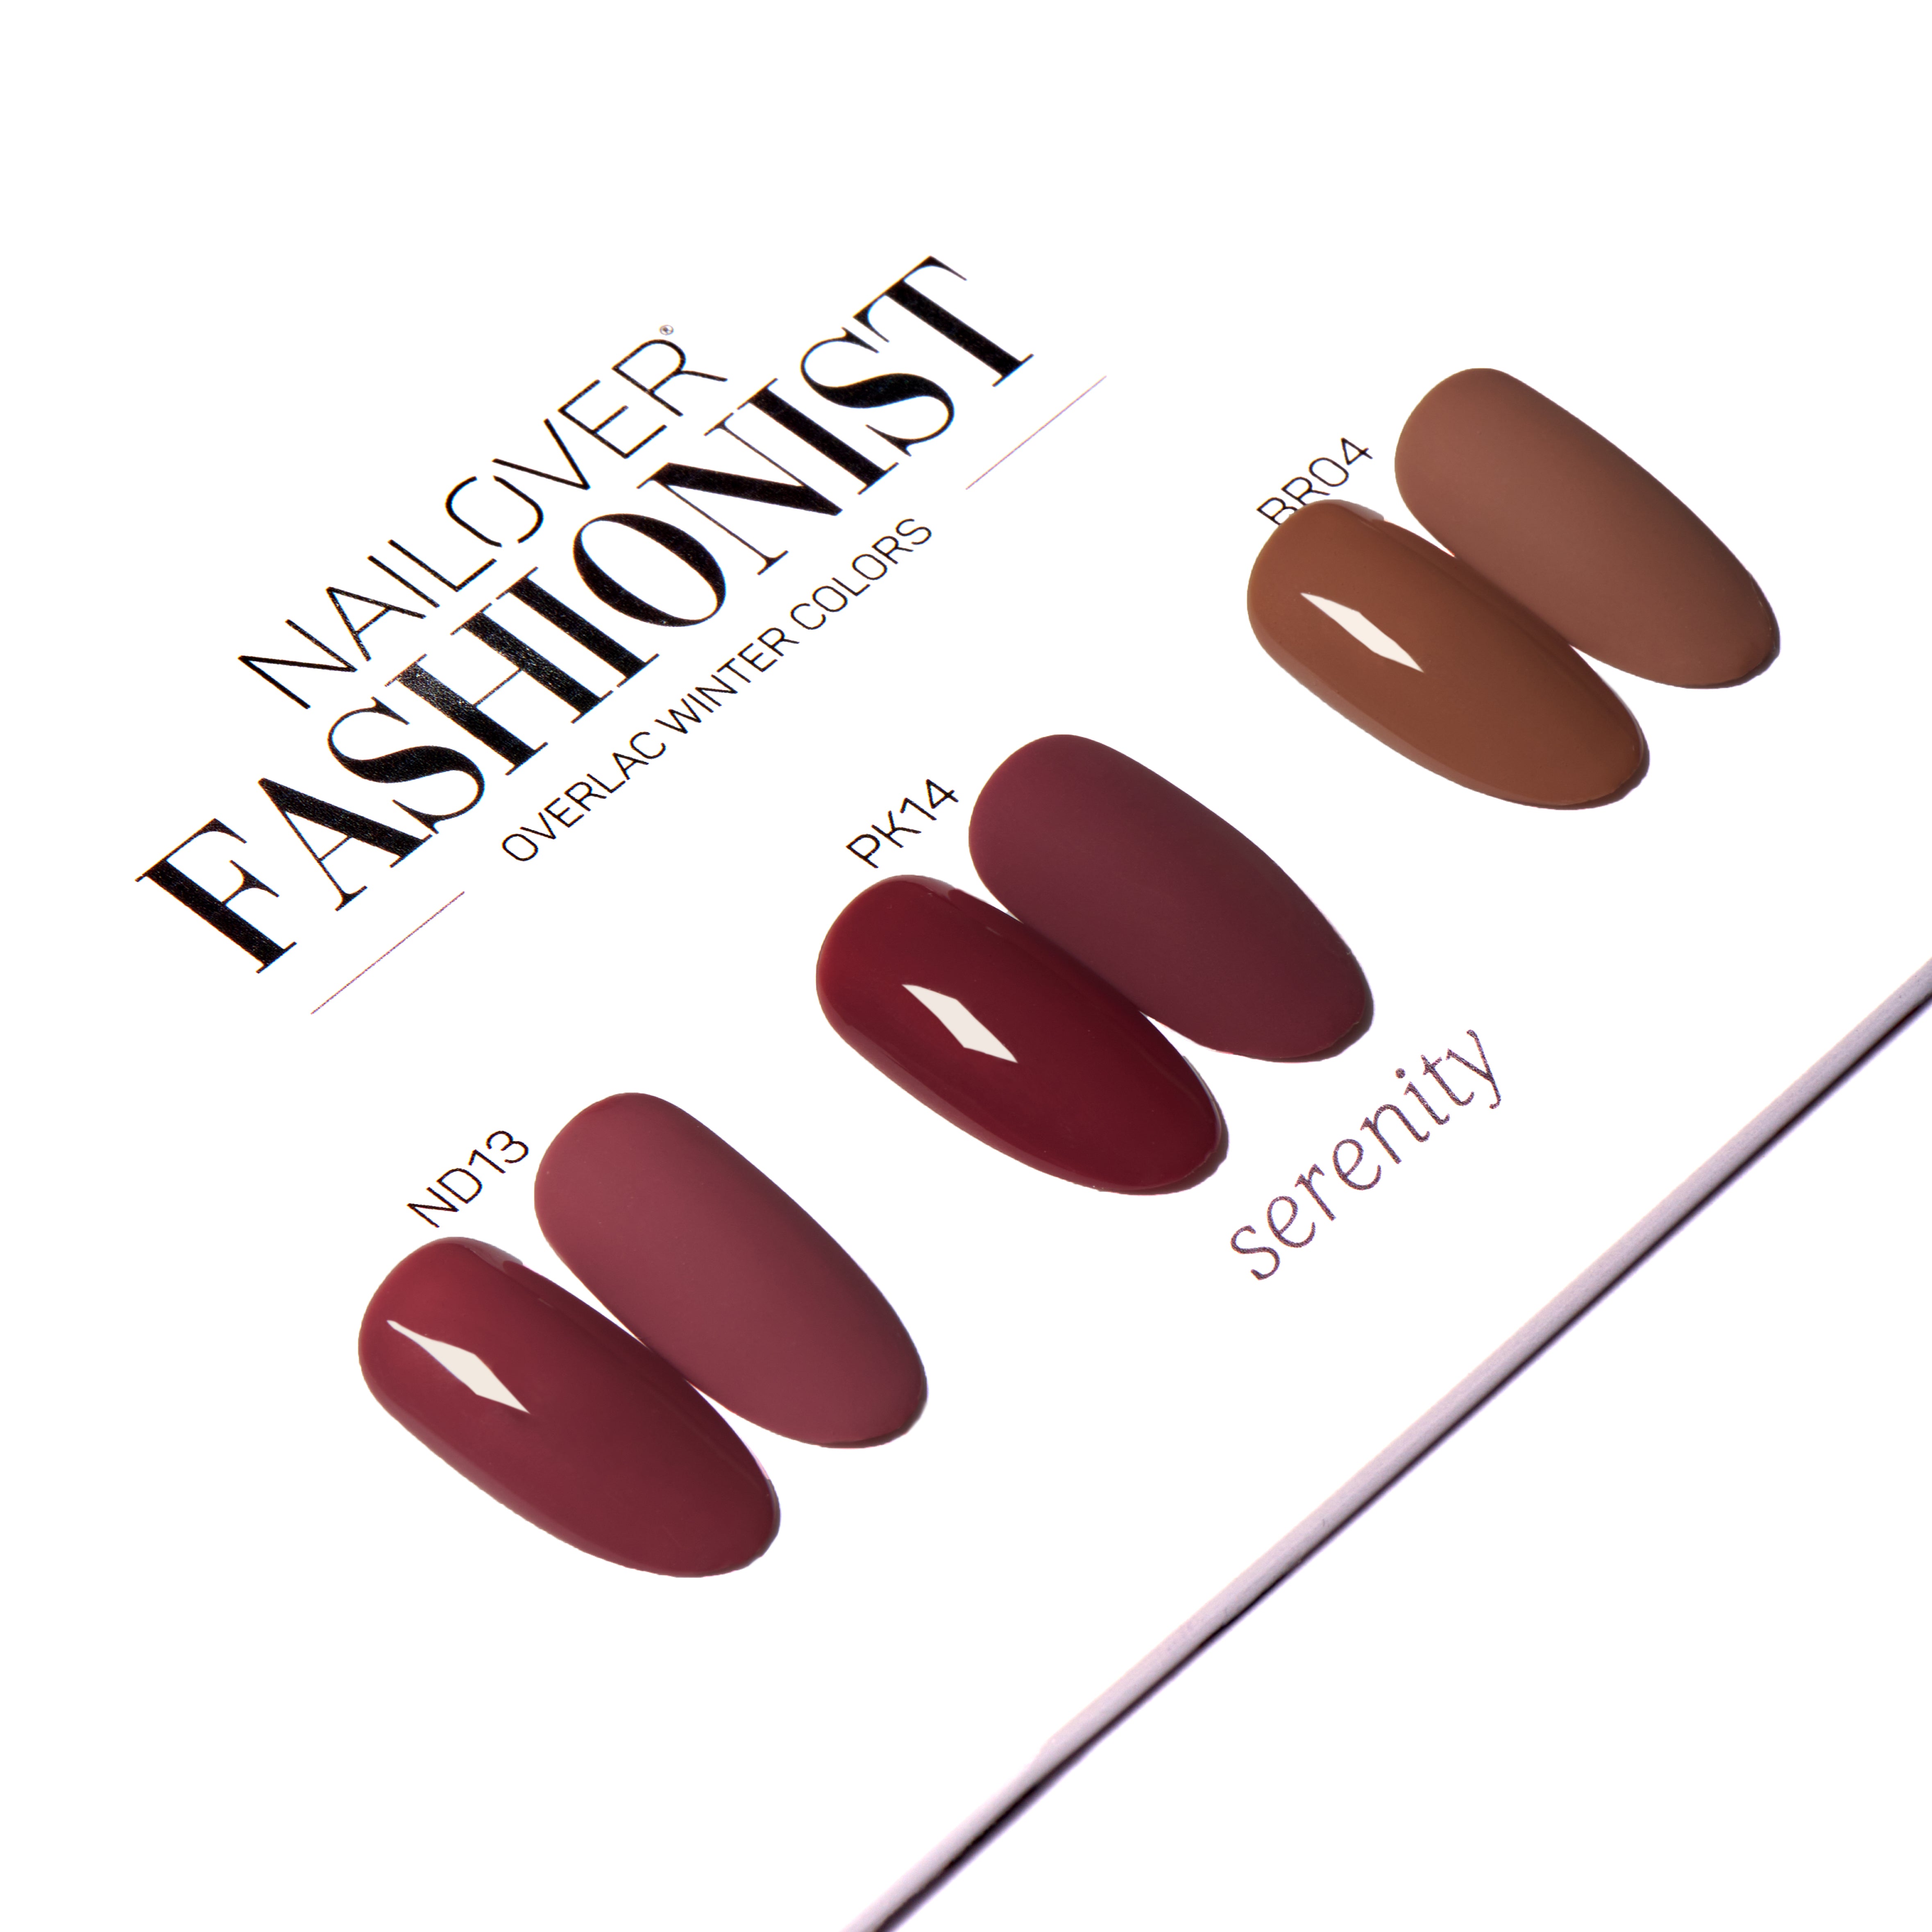 SERENITY - Fall/Winter Overlac Color Selection "FASHIONIST" (8596045857111)